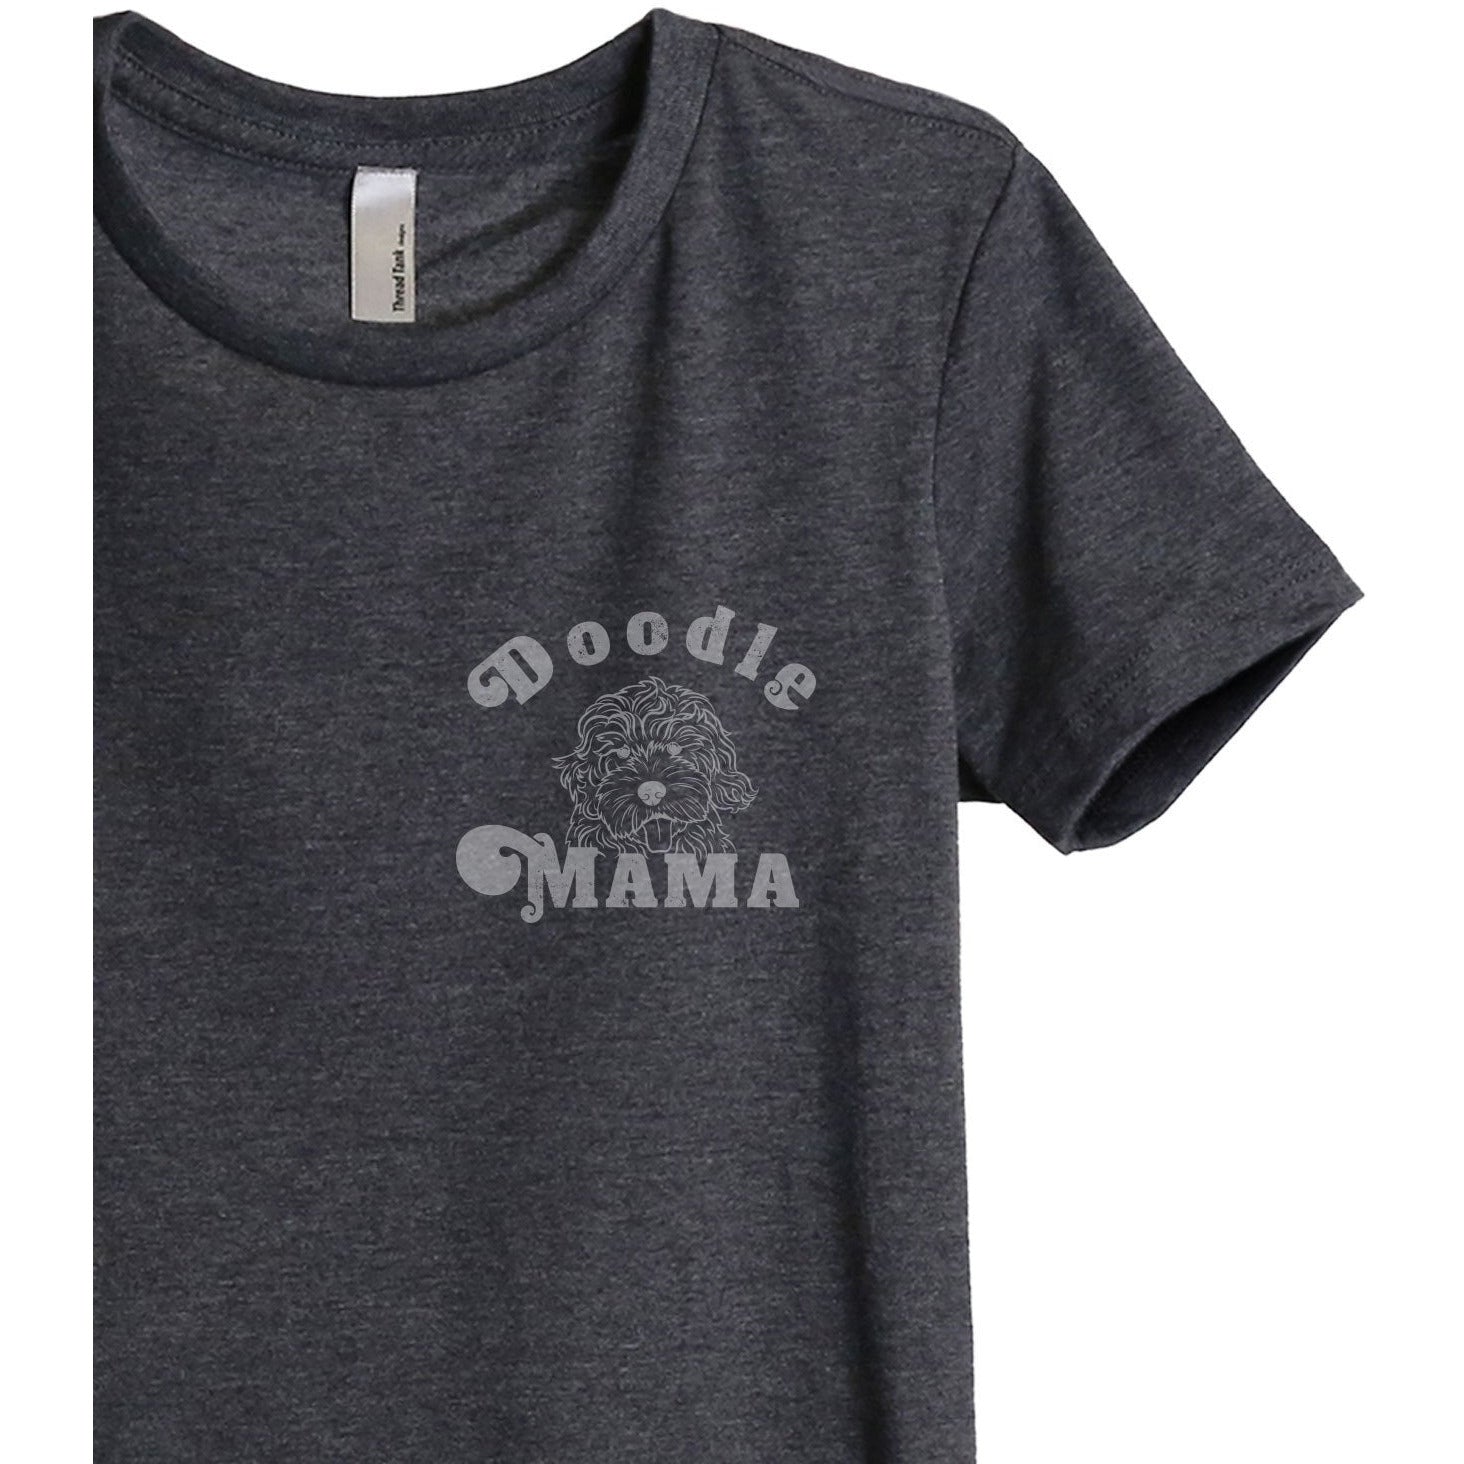 Doodle Mama Women's Relaxed Crewneck T-Shirt Top Tee Charcoal Grey Zoom Details